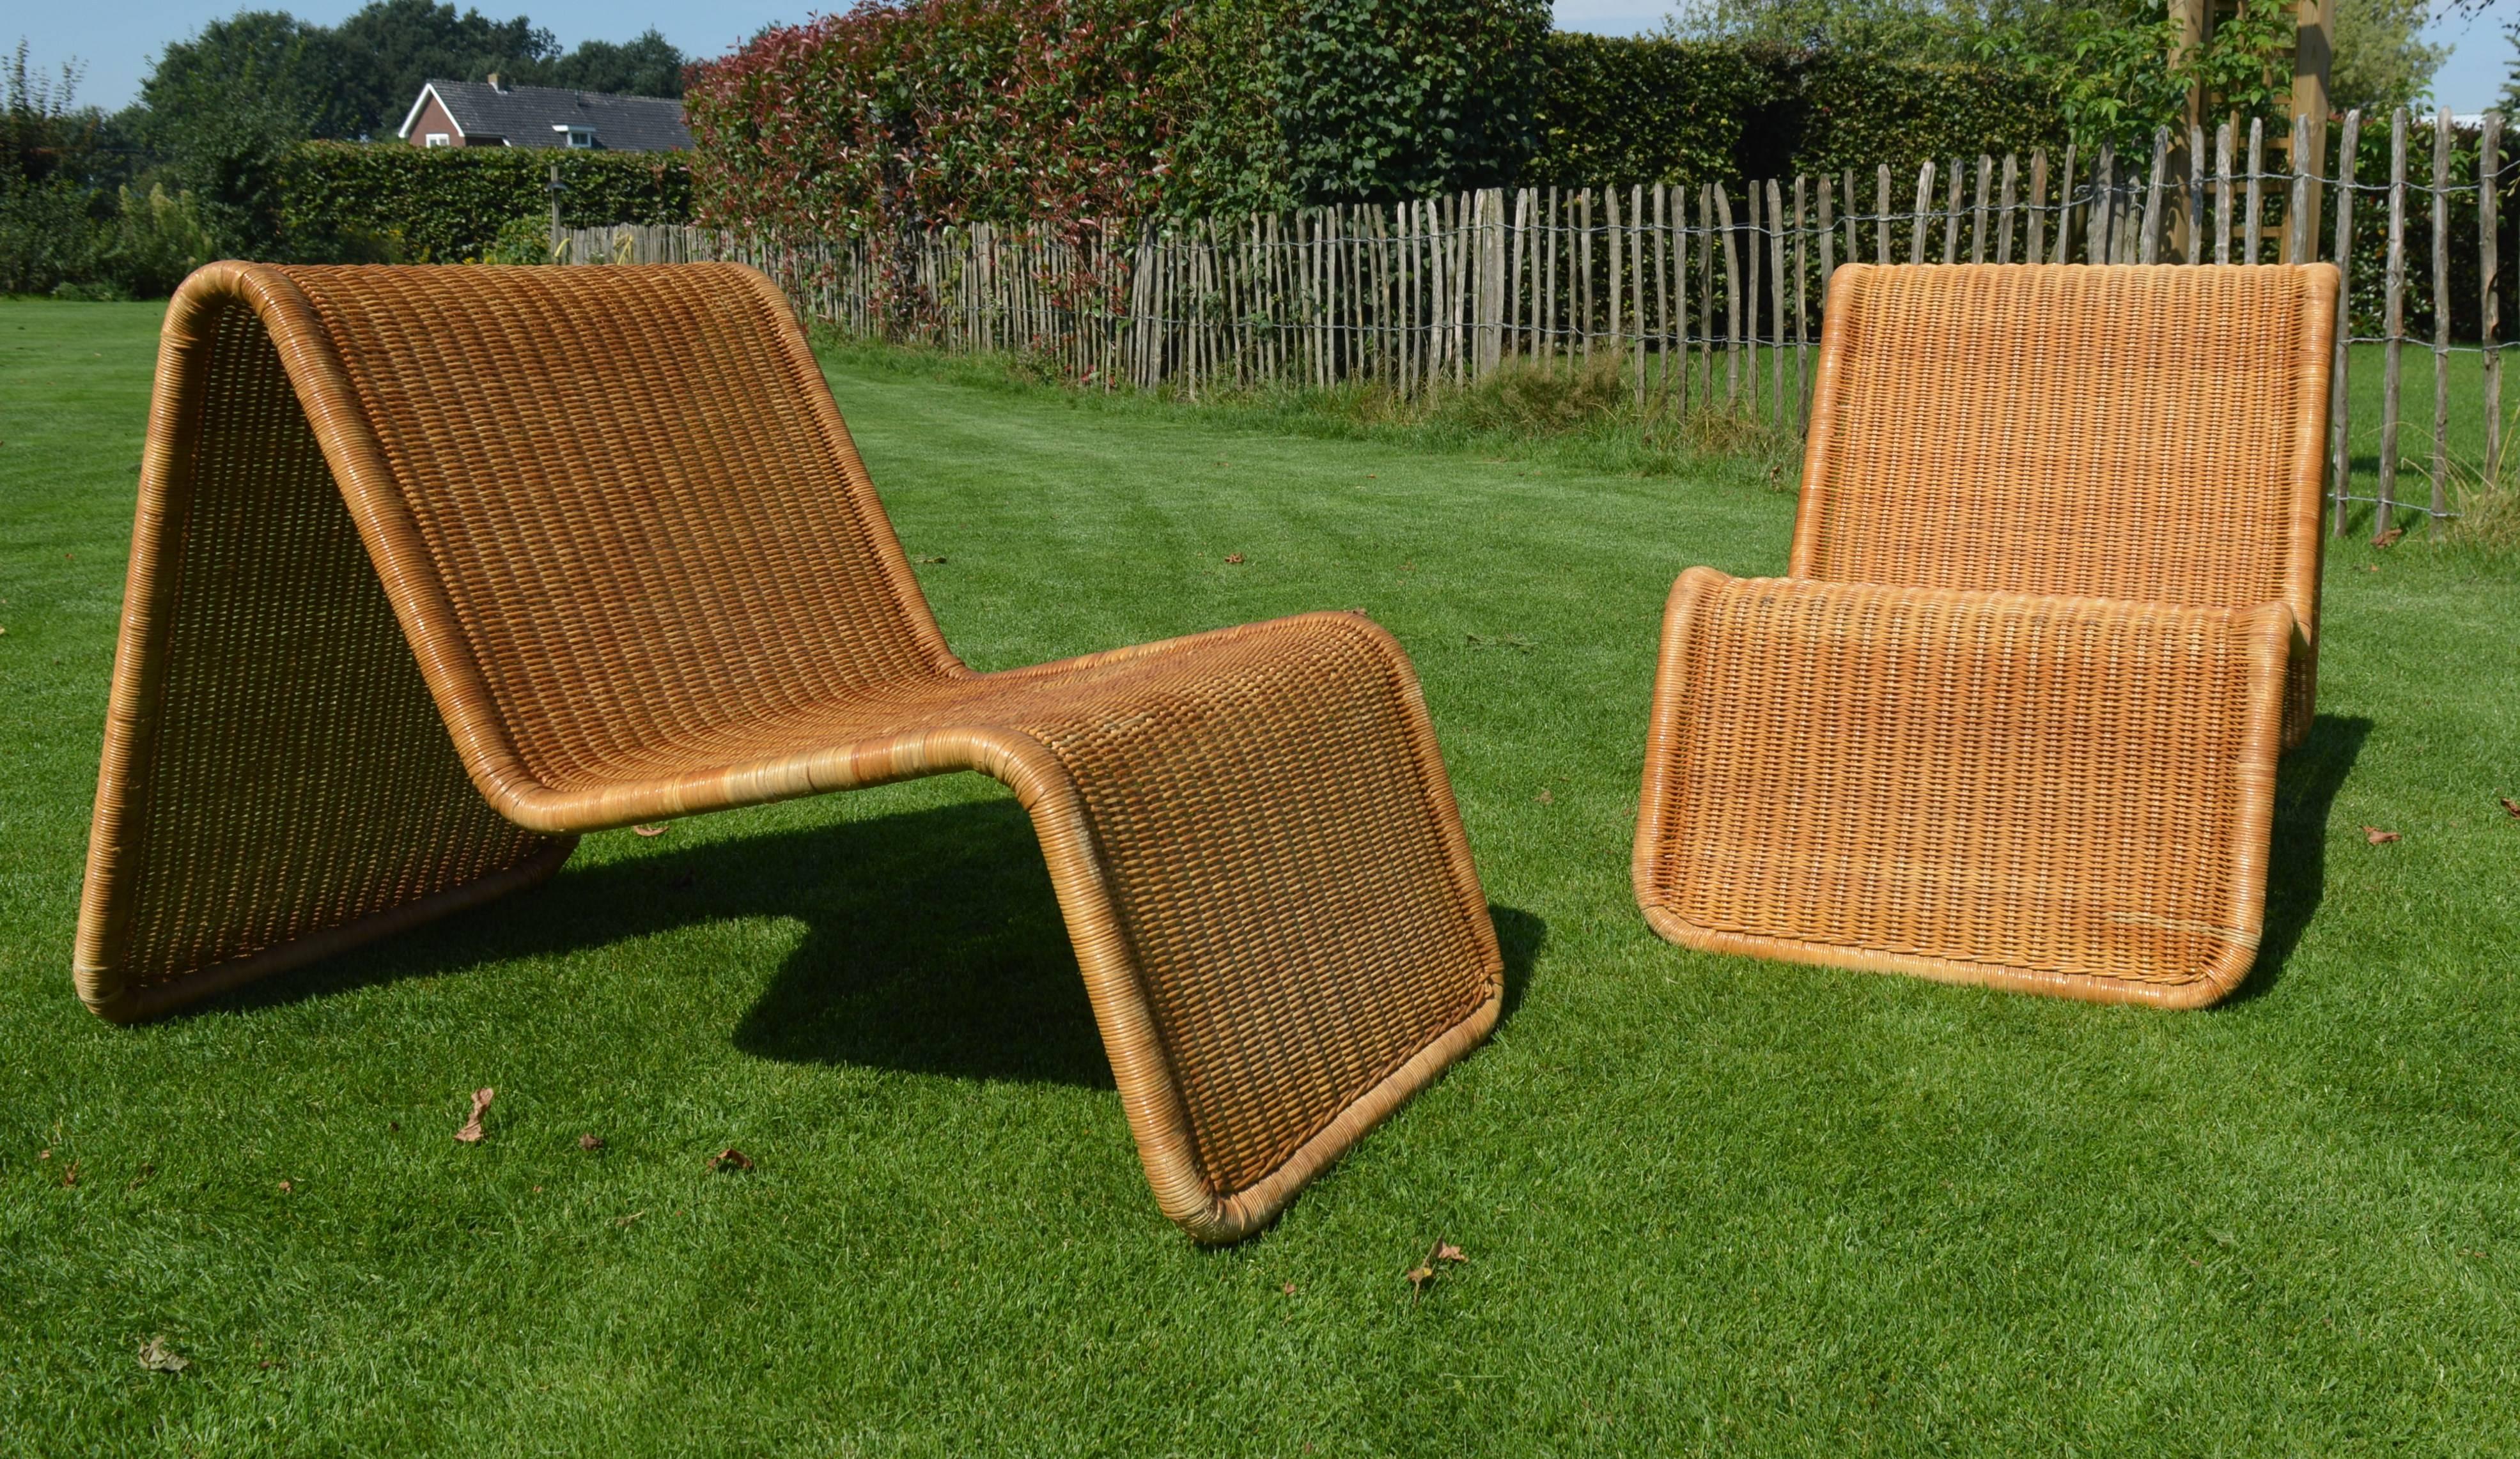 Steel Pair of Wicker Lounge Chairs by Tito Agnoli for Bonacina, Italy, 1960s